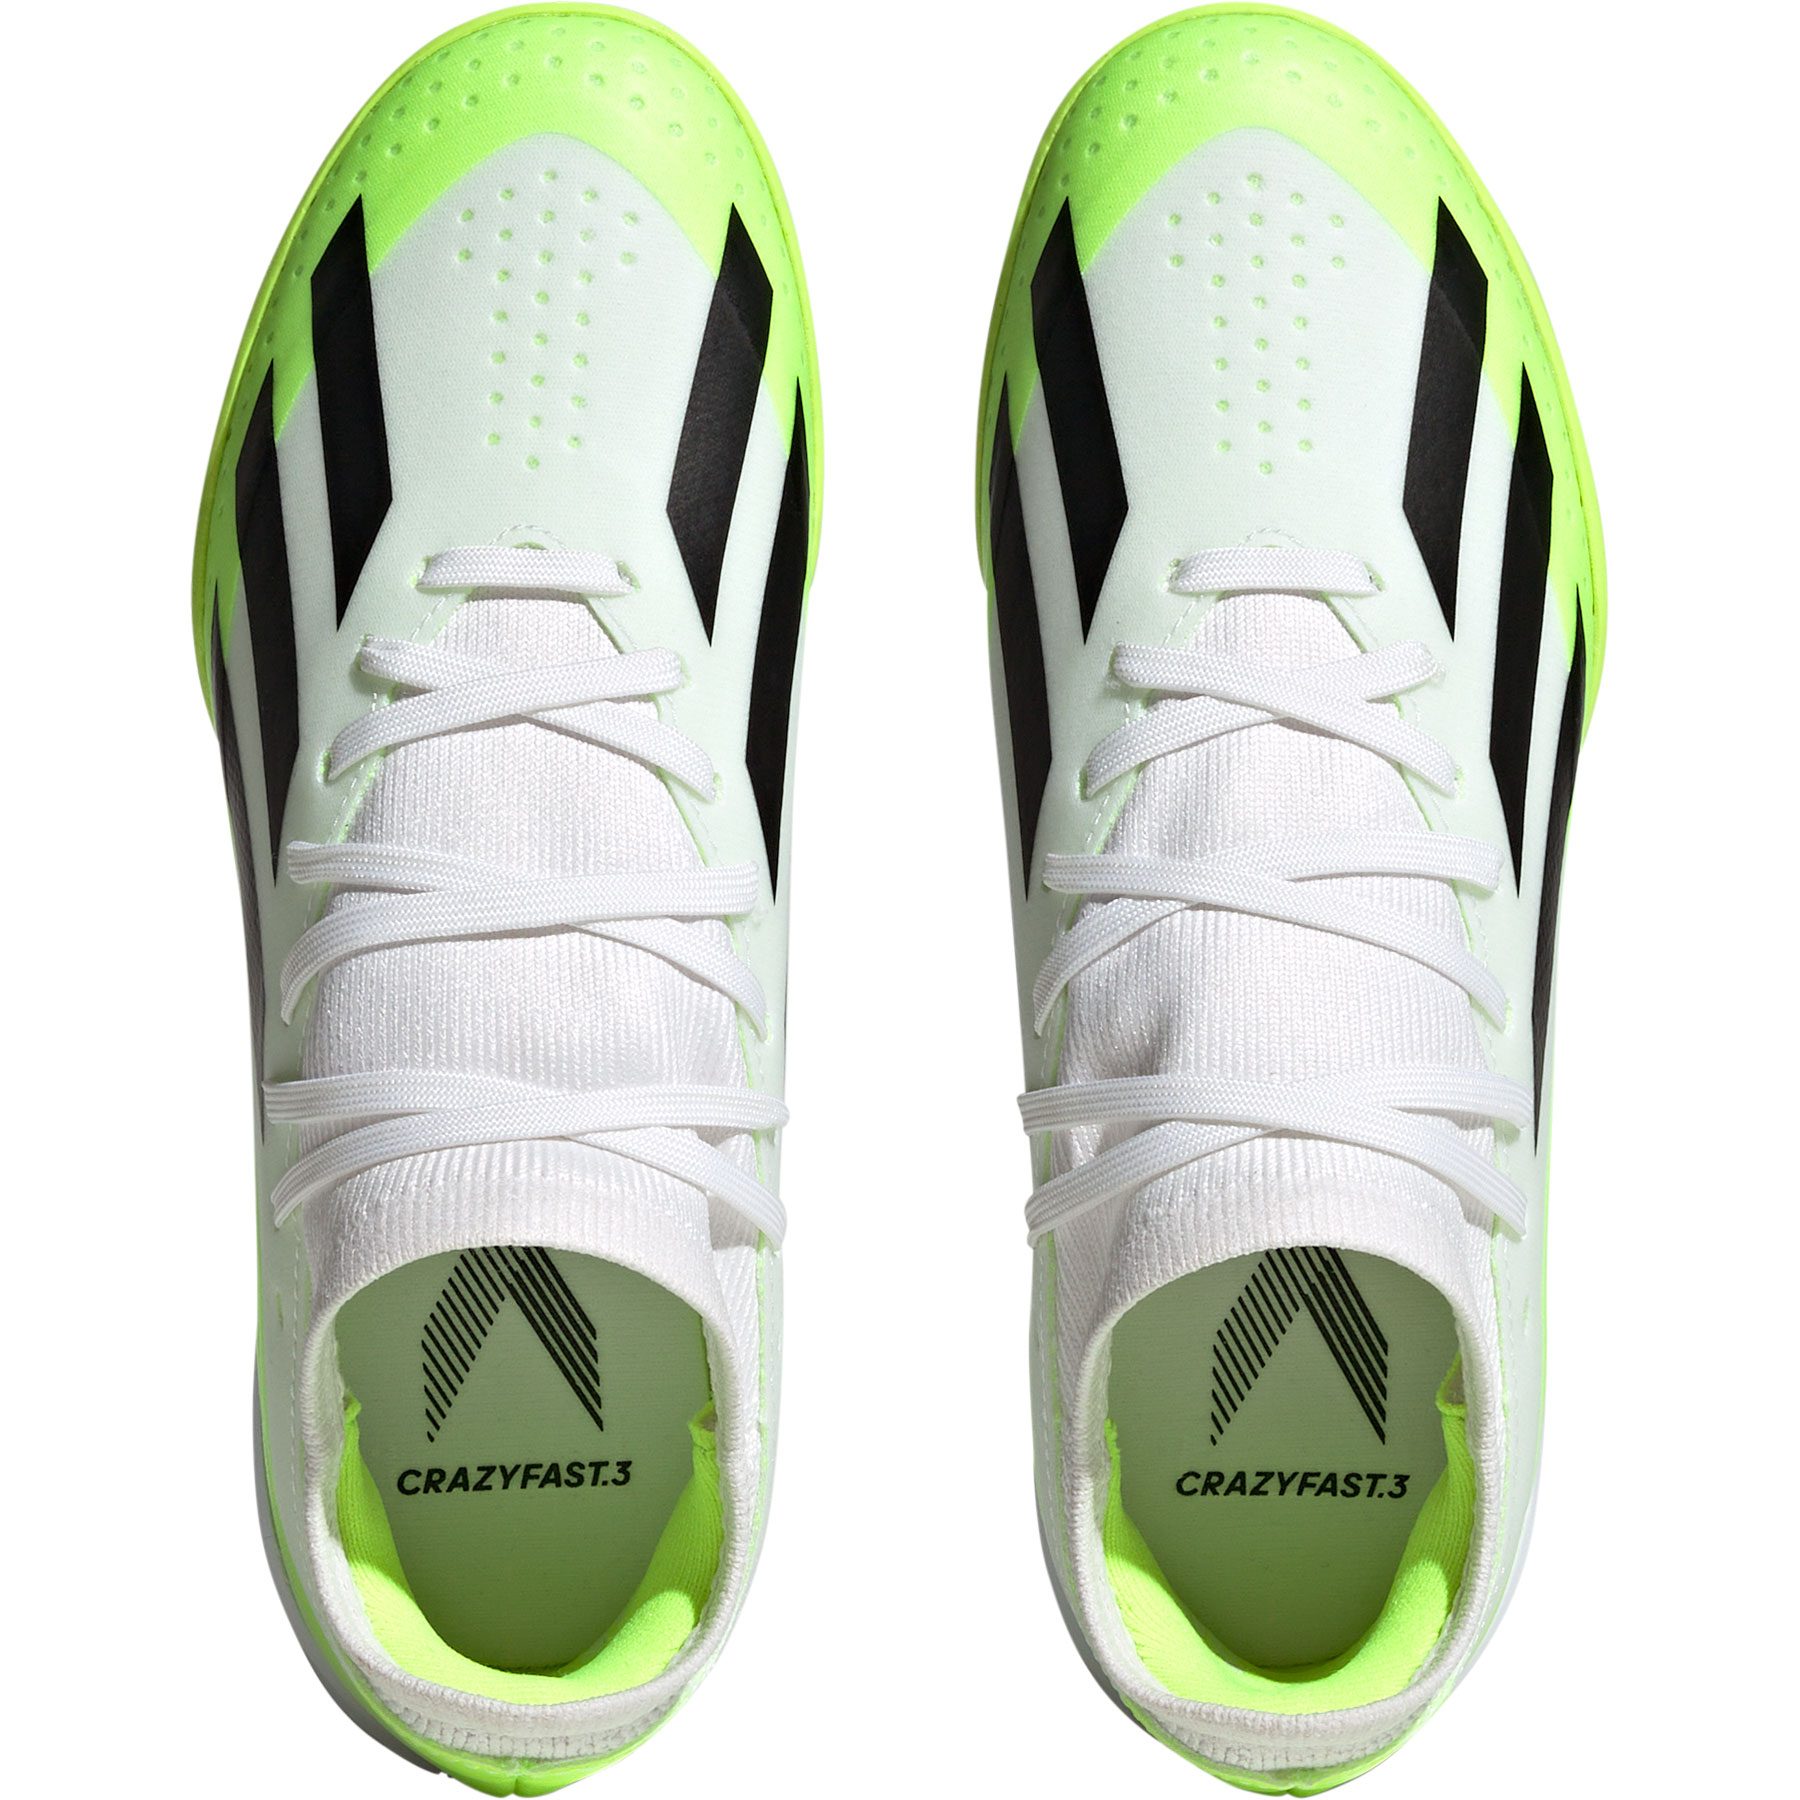 adidas - X Crazyfast.3 at Football Shop Kids IN Bittl Shoes white Sport football